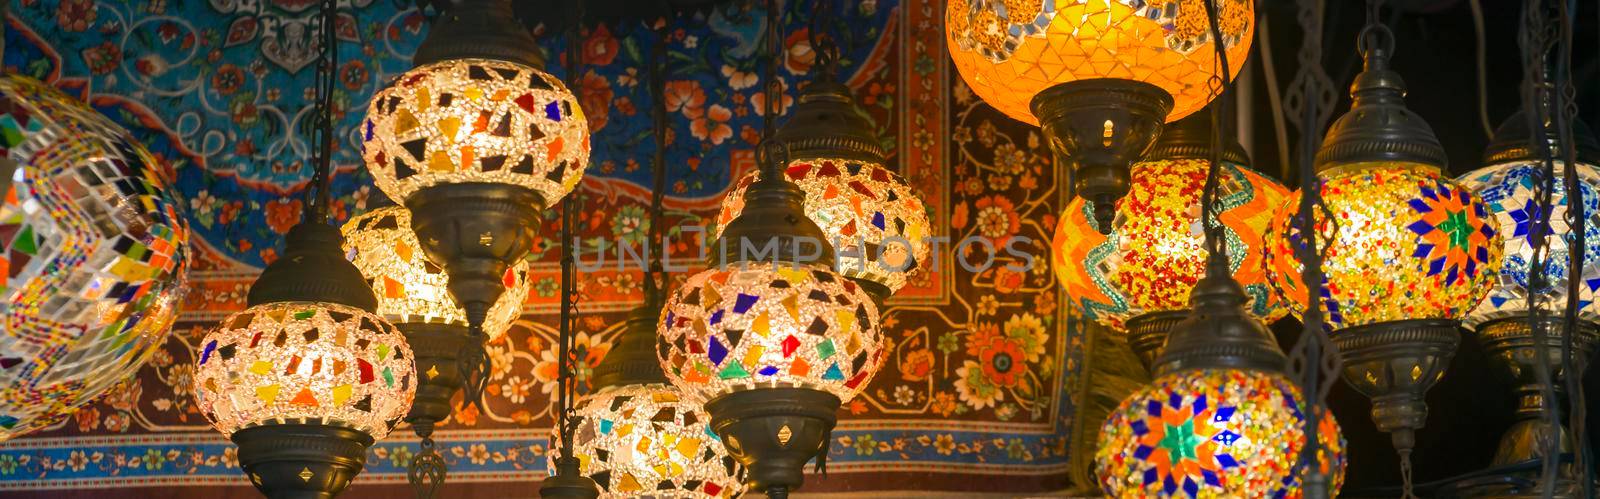 Middle Eastern lambas of different colors and sizes are hanging in the bazaar. Bright traditional Arabic and Turkish lanterns made of metal and glass, inlaid with mosaic details of different colors.